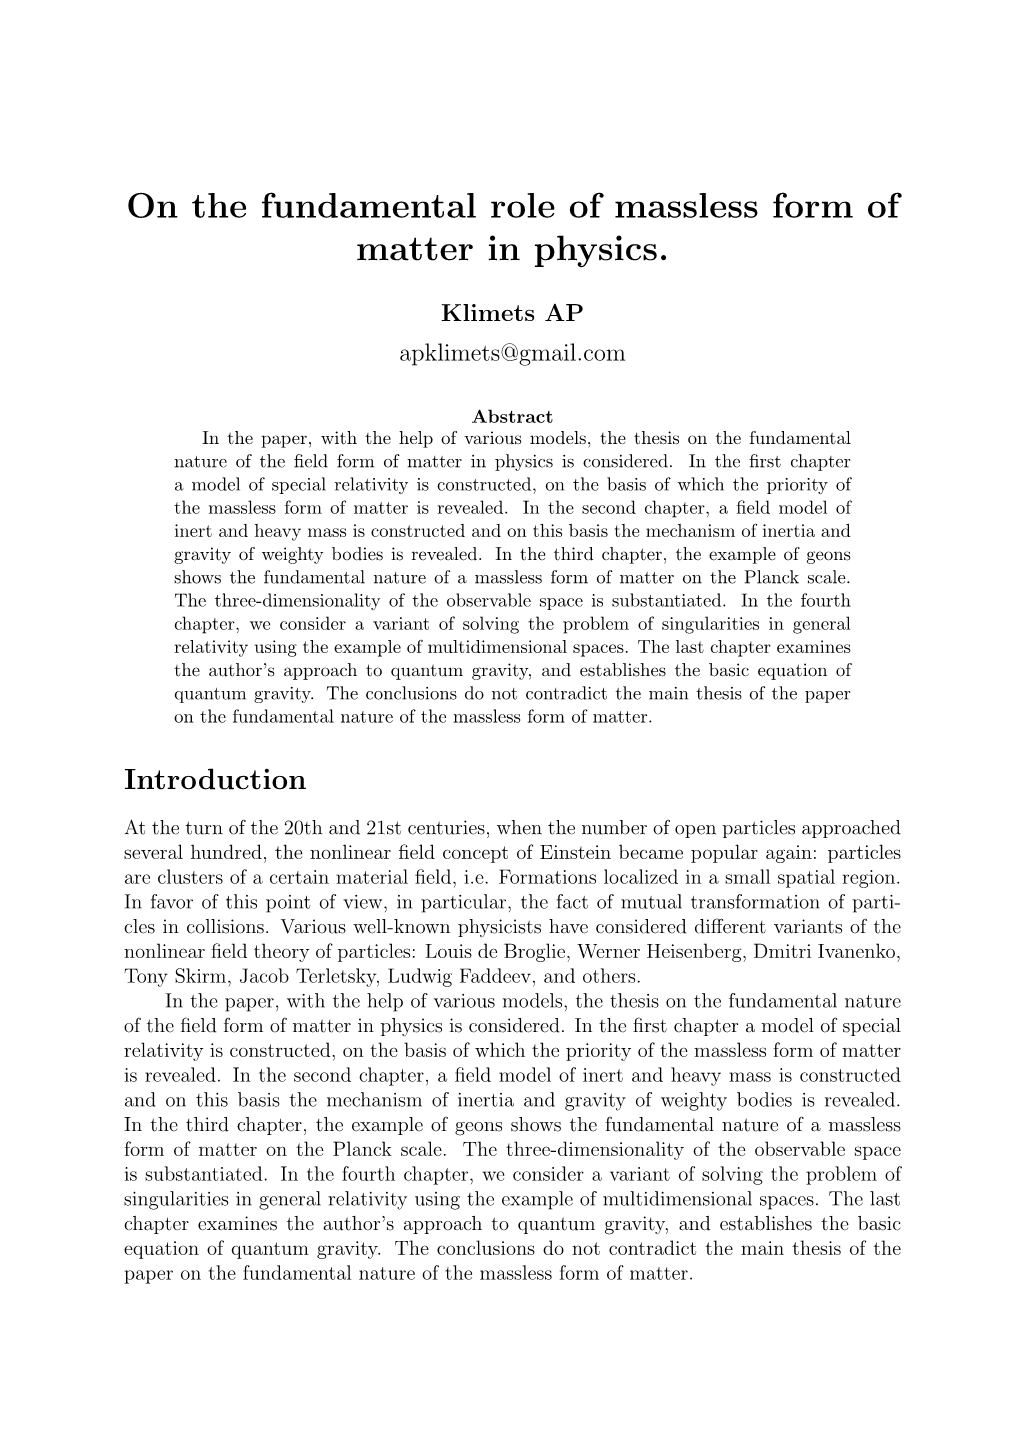 On the Fundamental Role of Massless Form of Matter in Physics